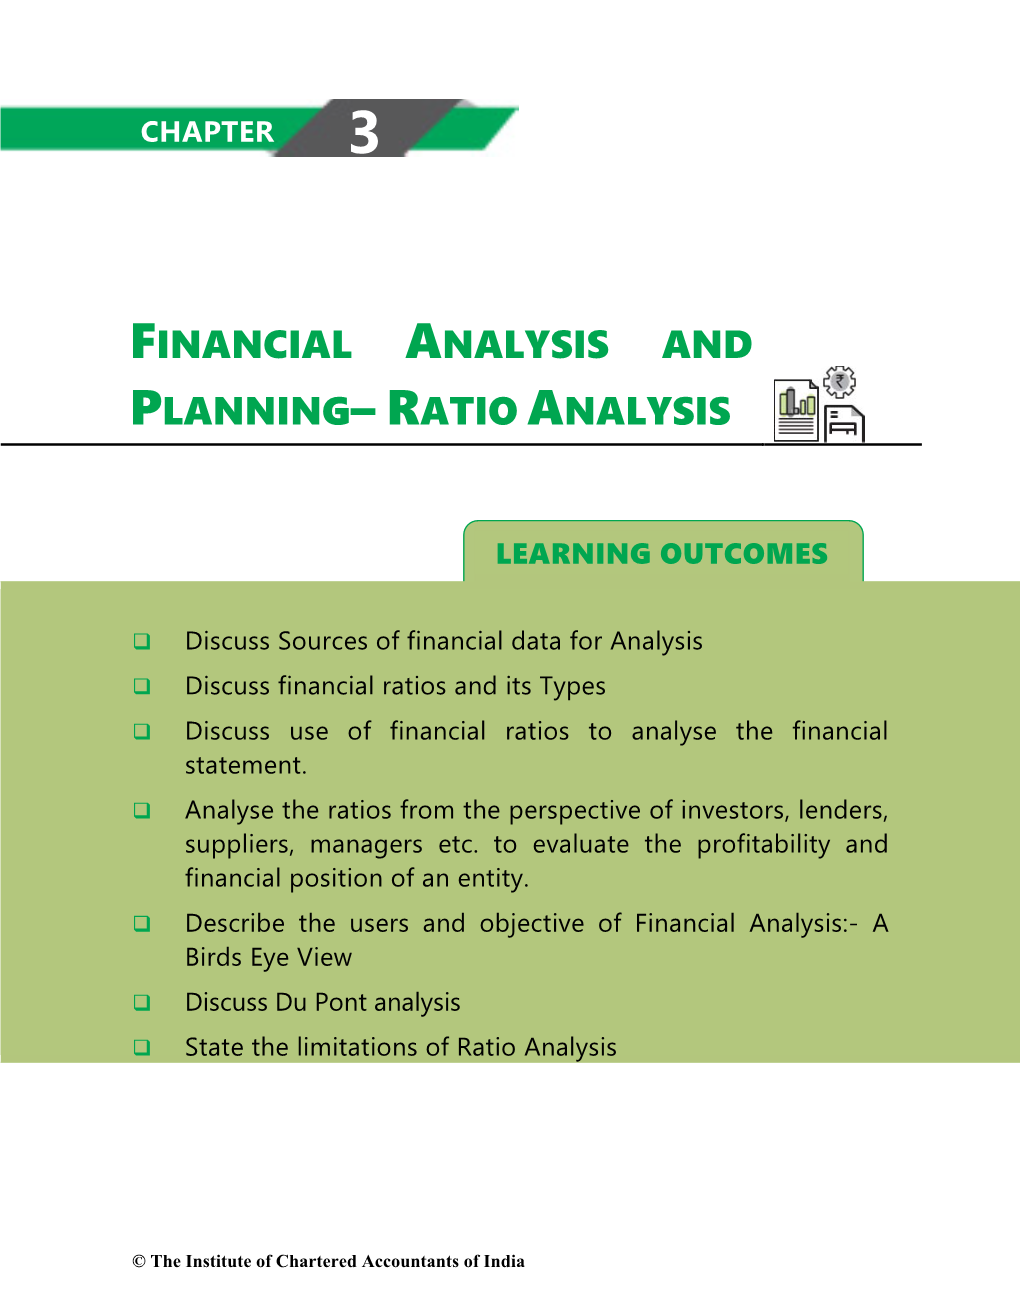 Financial Analysis and Planning– Ratio Analysis